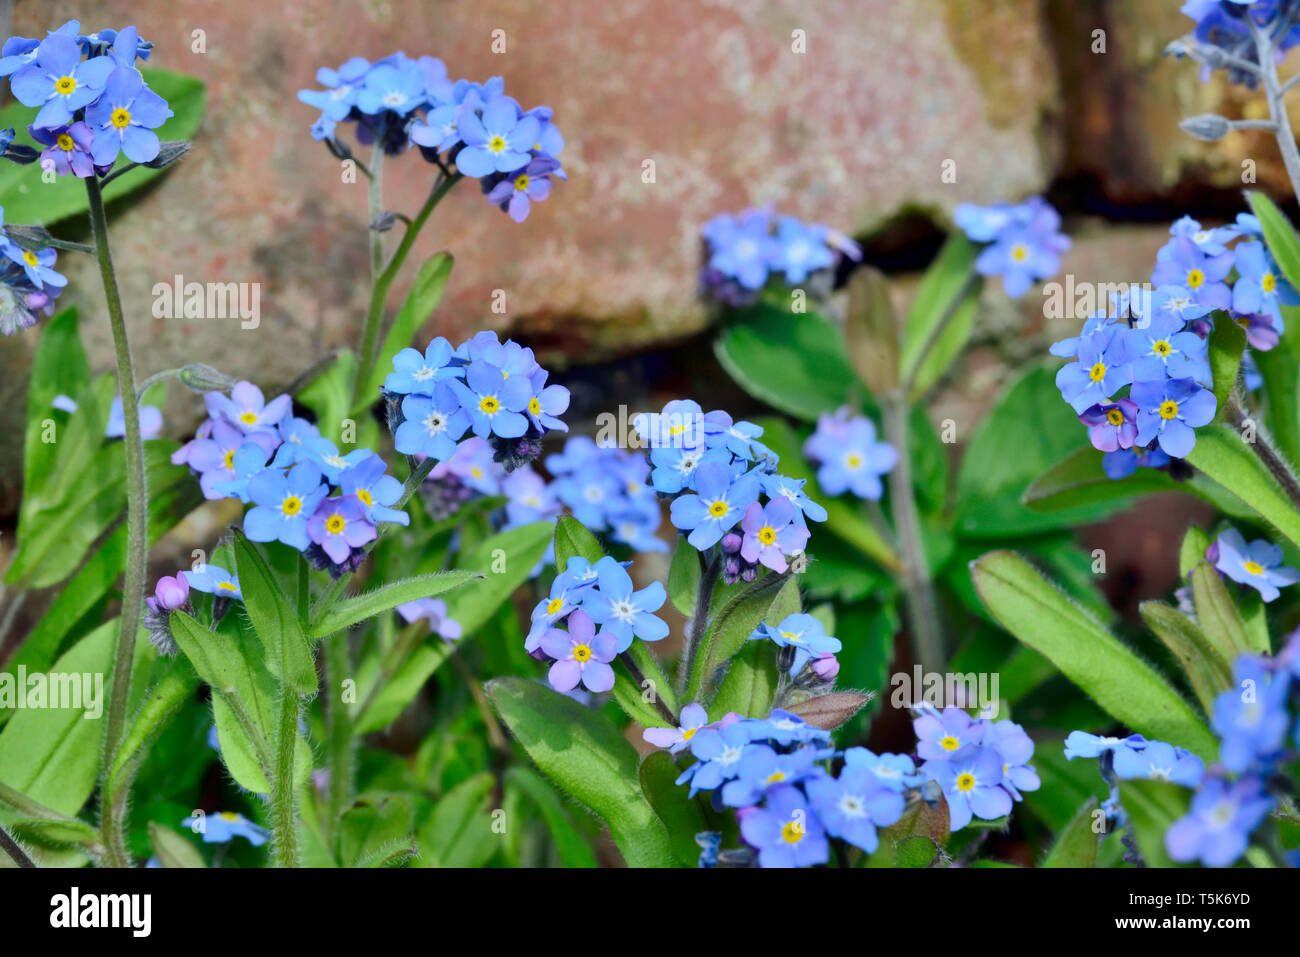 Forget Me Not flowers growing wild next to brick wall Stock Photo